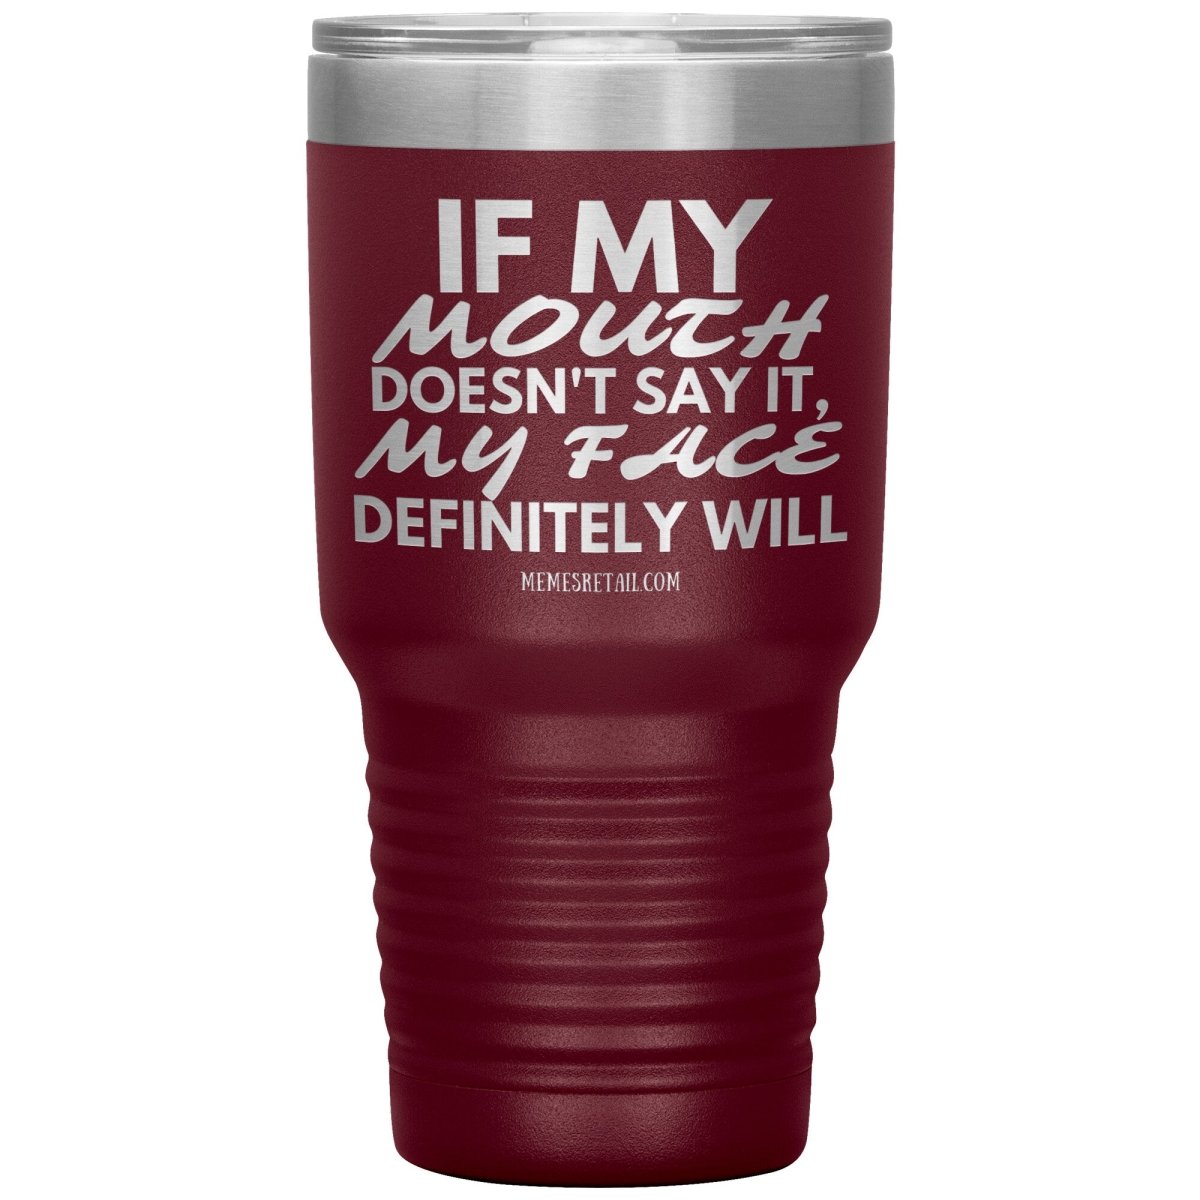 If my mouth doesn't say it, my face definitely will Tumblers, 30oz Insulated Tumbler / Maroon - MemesRetail.com